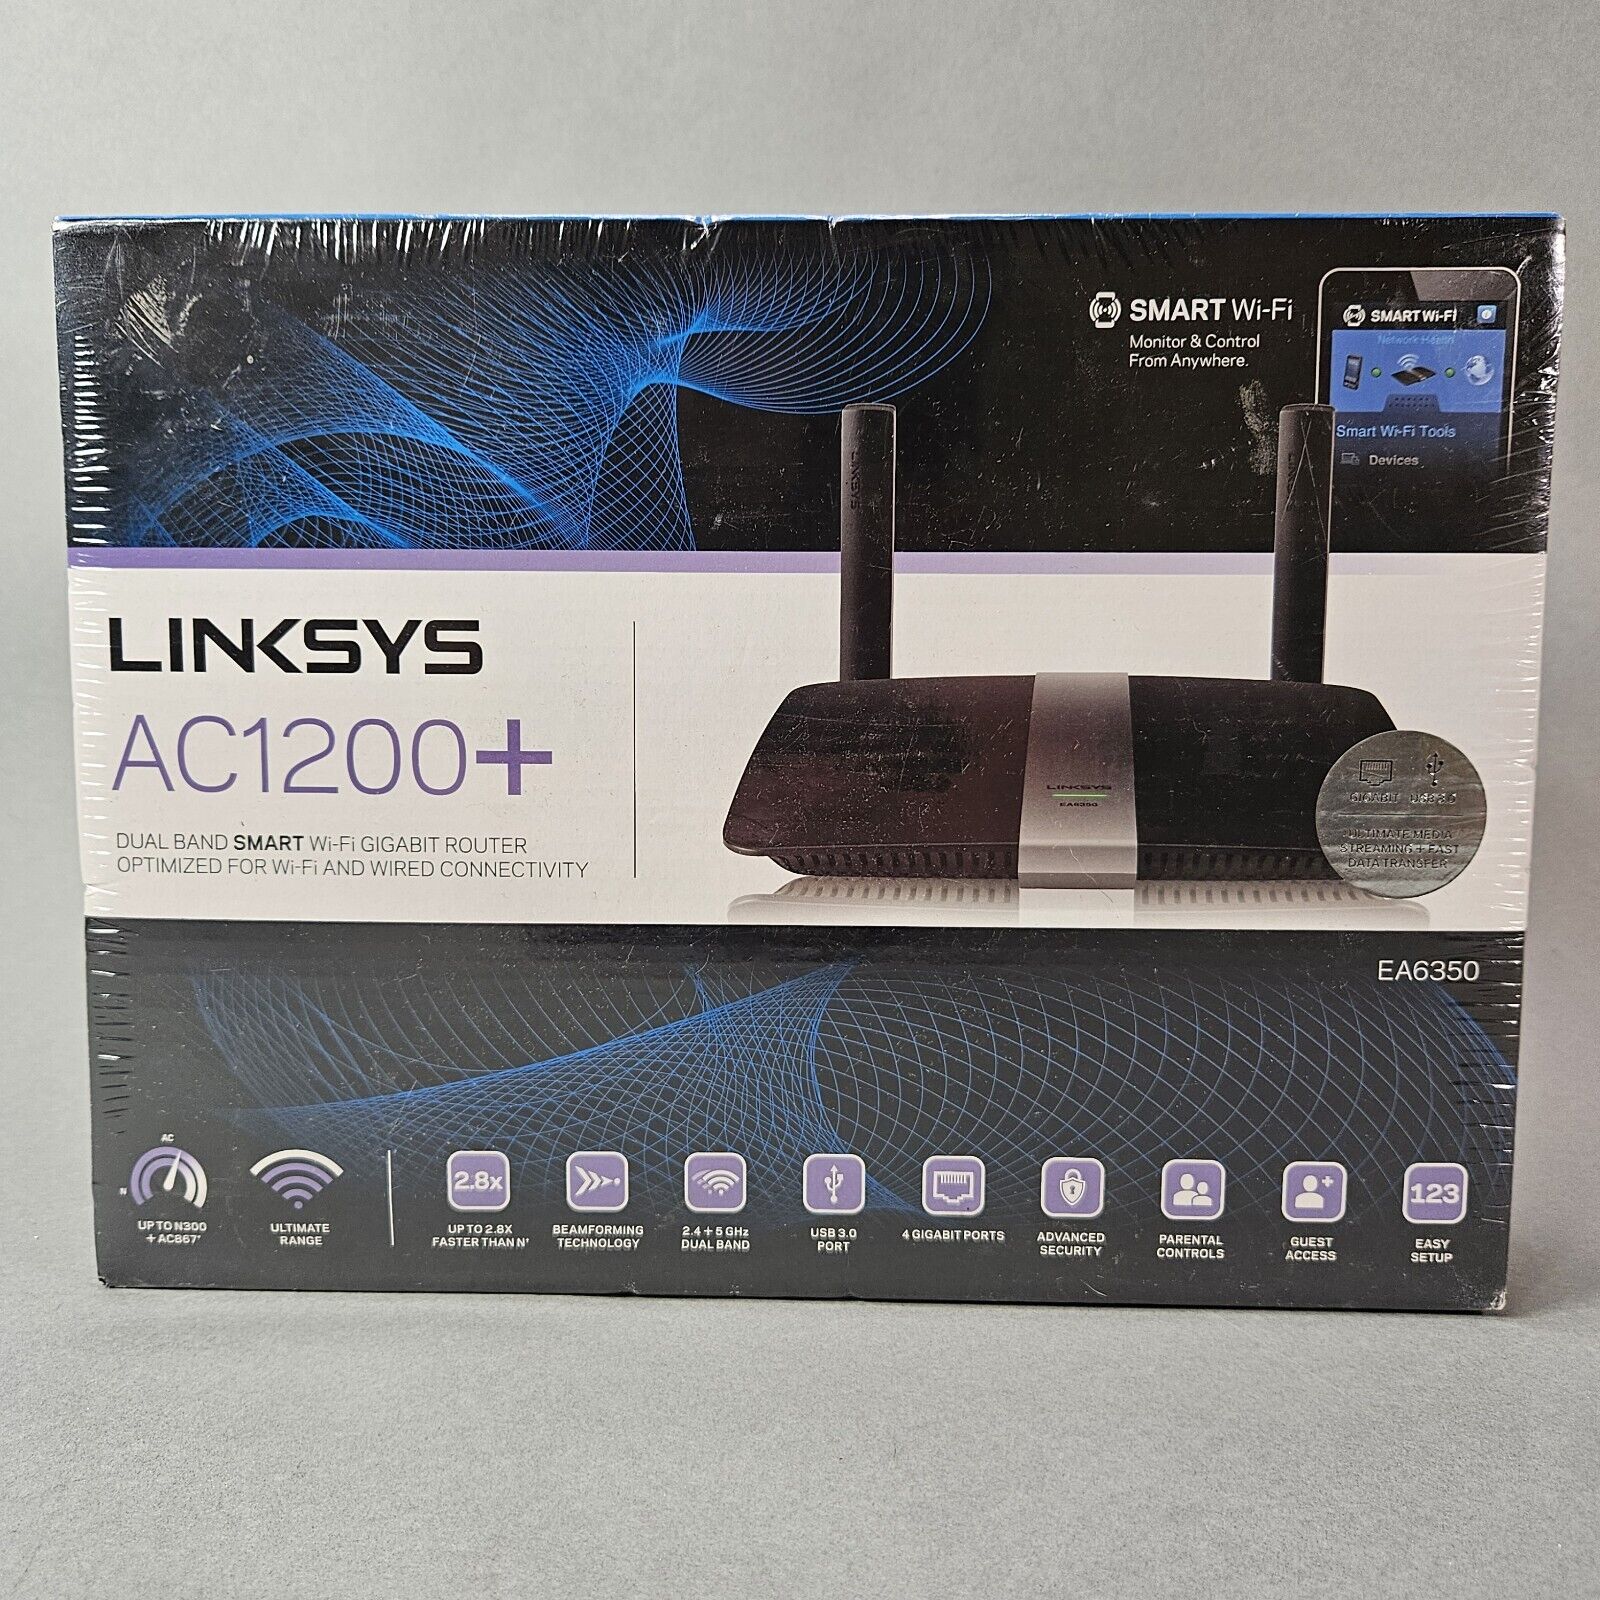 Linksys Dual Band Smart Wi-Fi Wireless Router Black AC1200+ EA6350 New Sealed